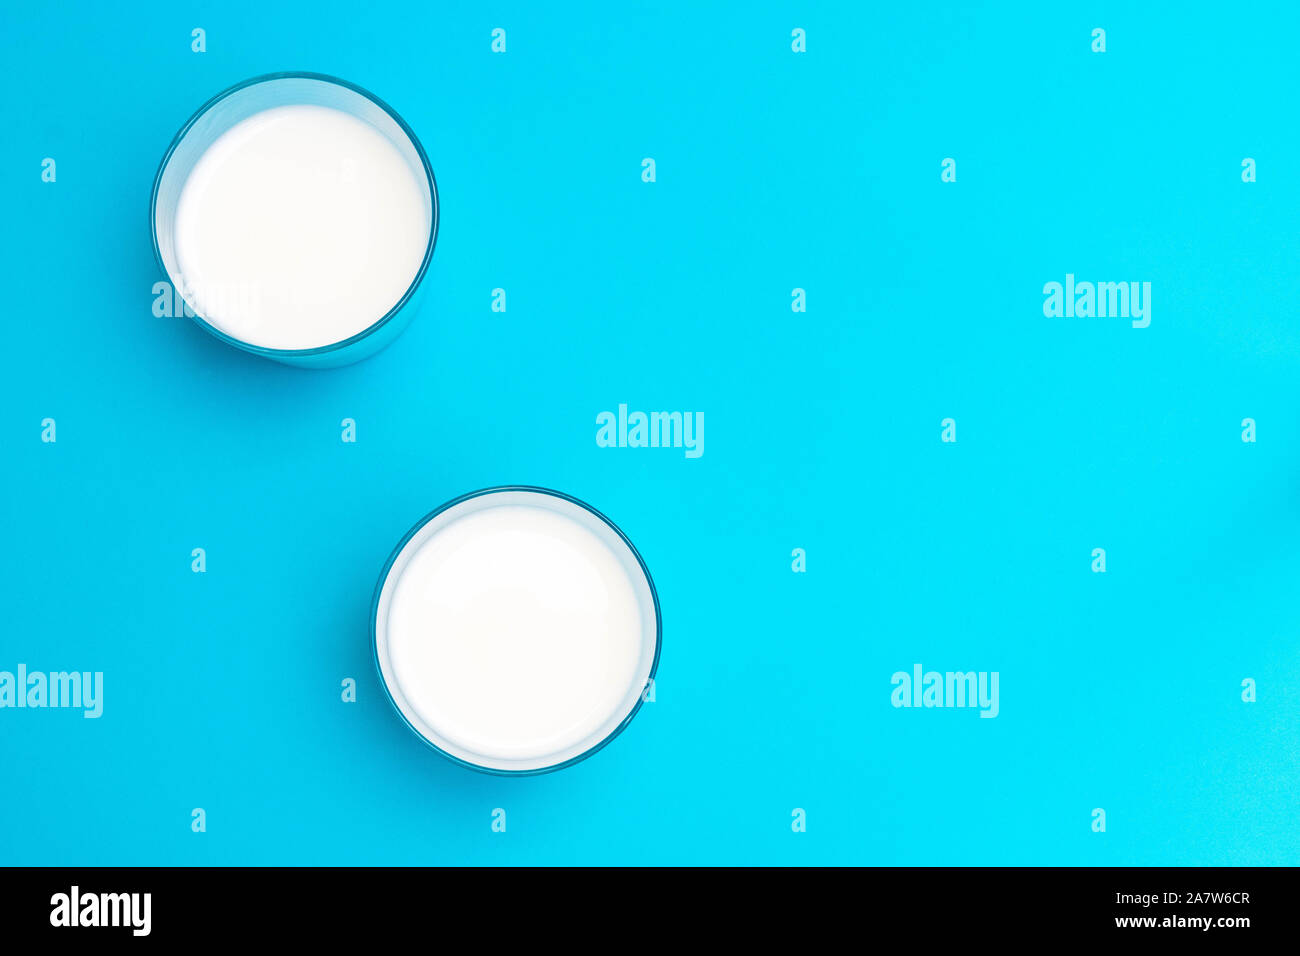 Two glasses of ayran (kefir) yogurt-based beverage with salt and water on blue background. Stock Photo